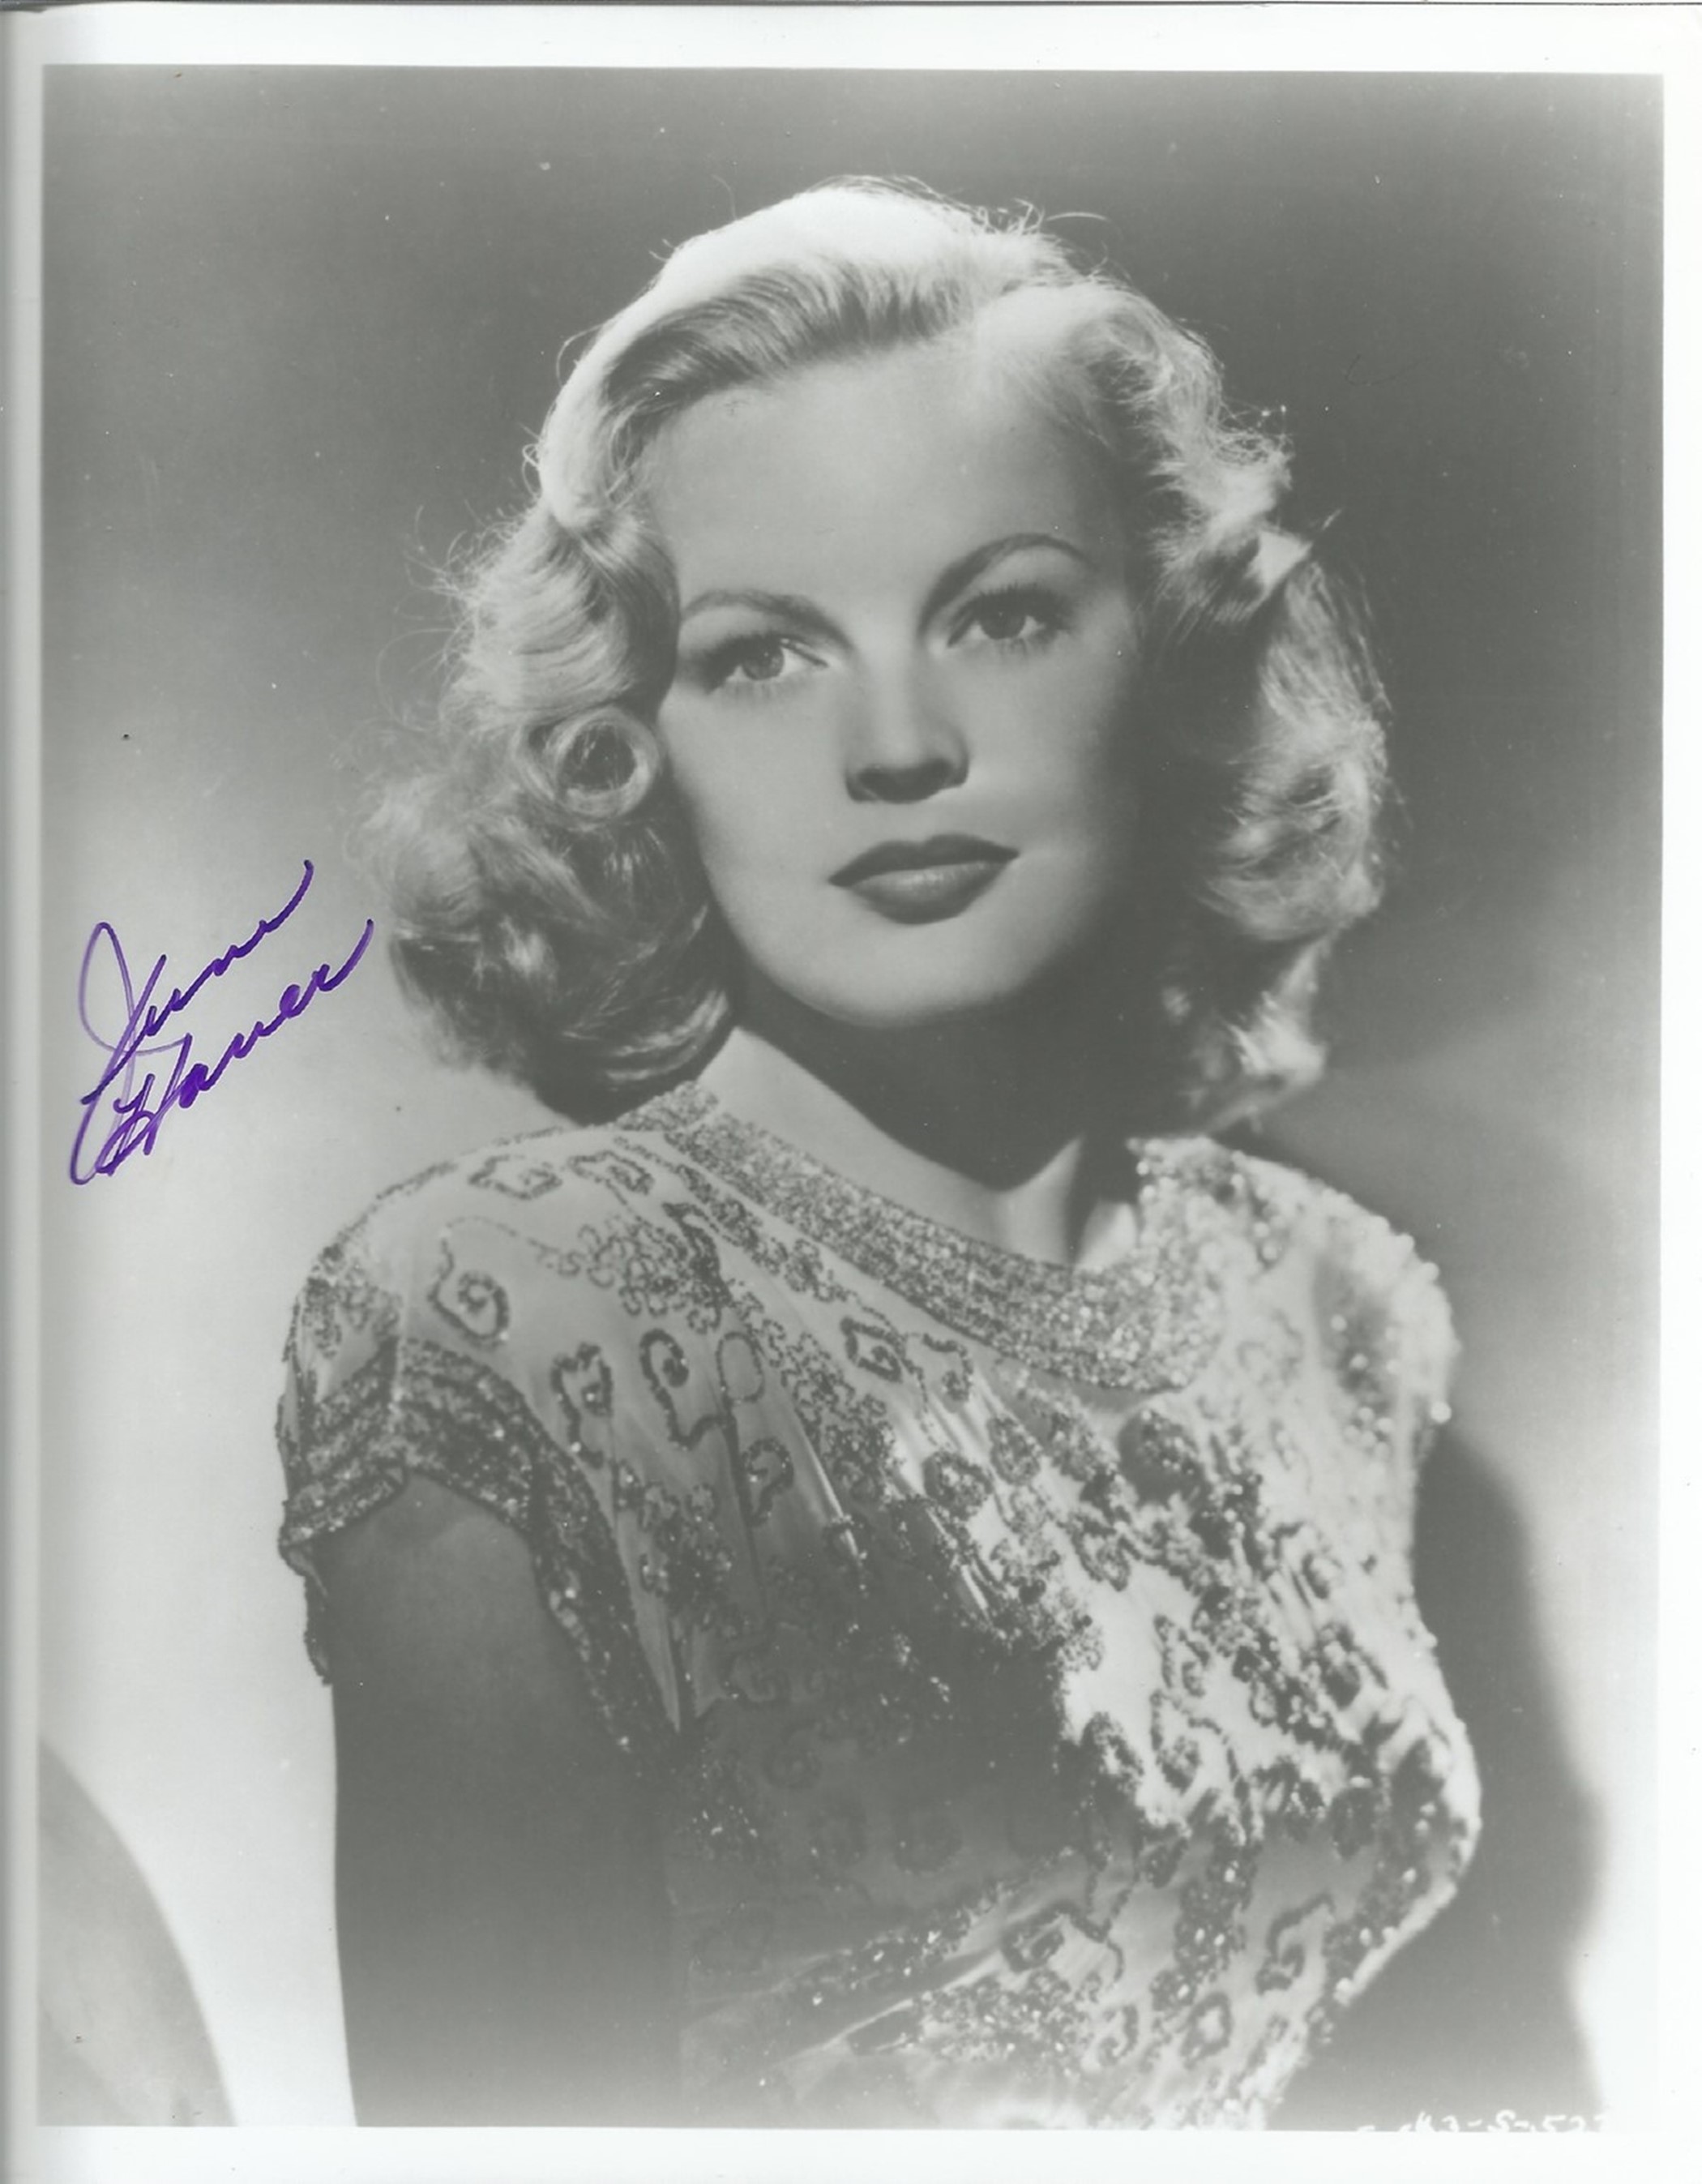 June Haver signed 10x8 black and white photo June 10, 1926 - July 4, 2005) was an American film